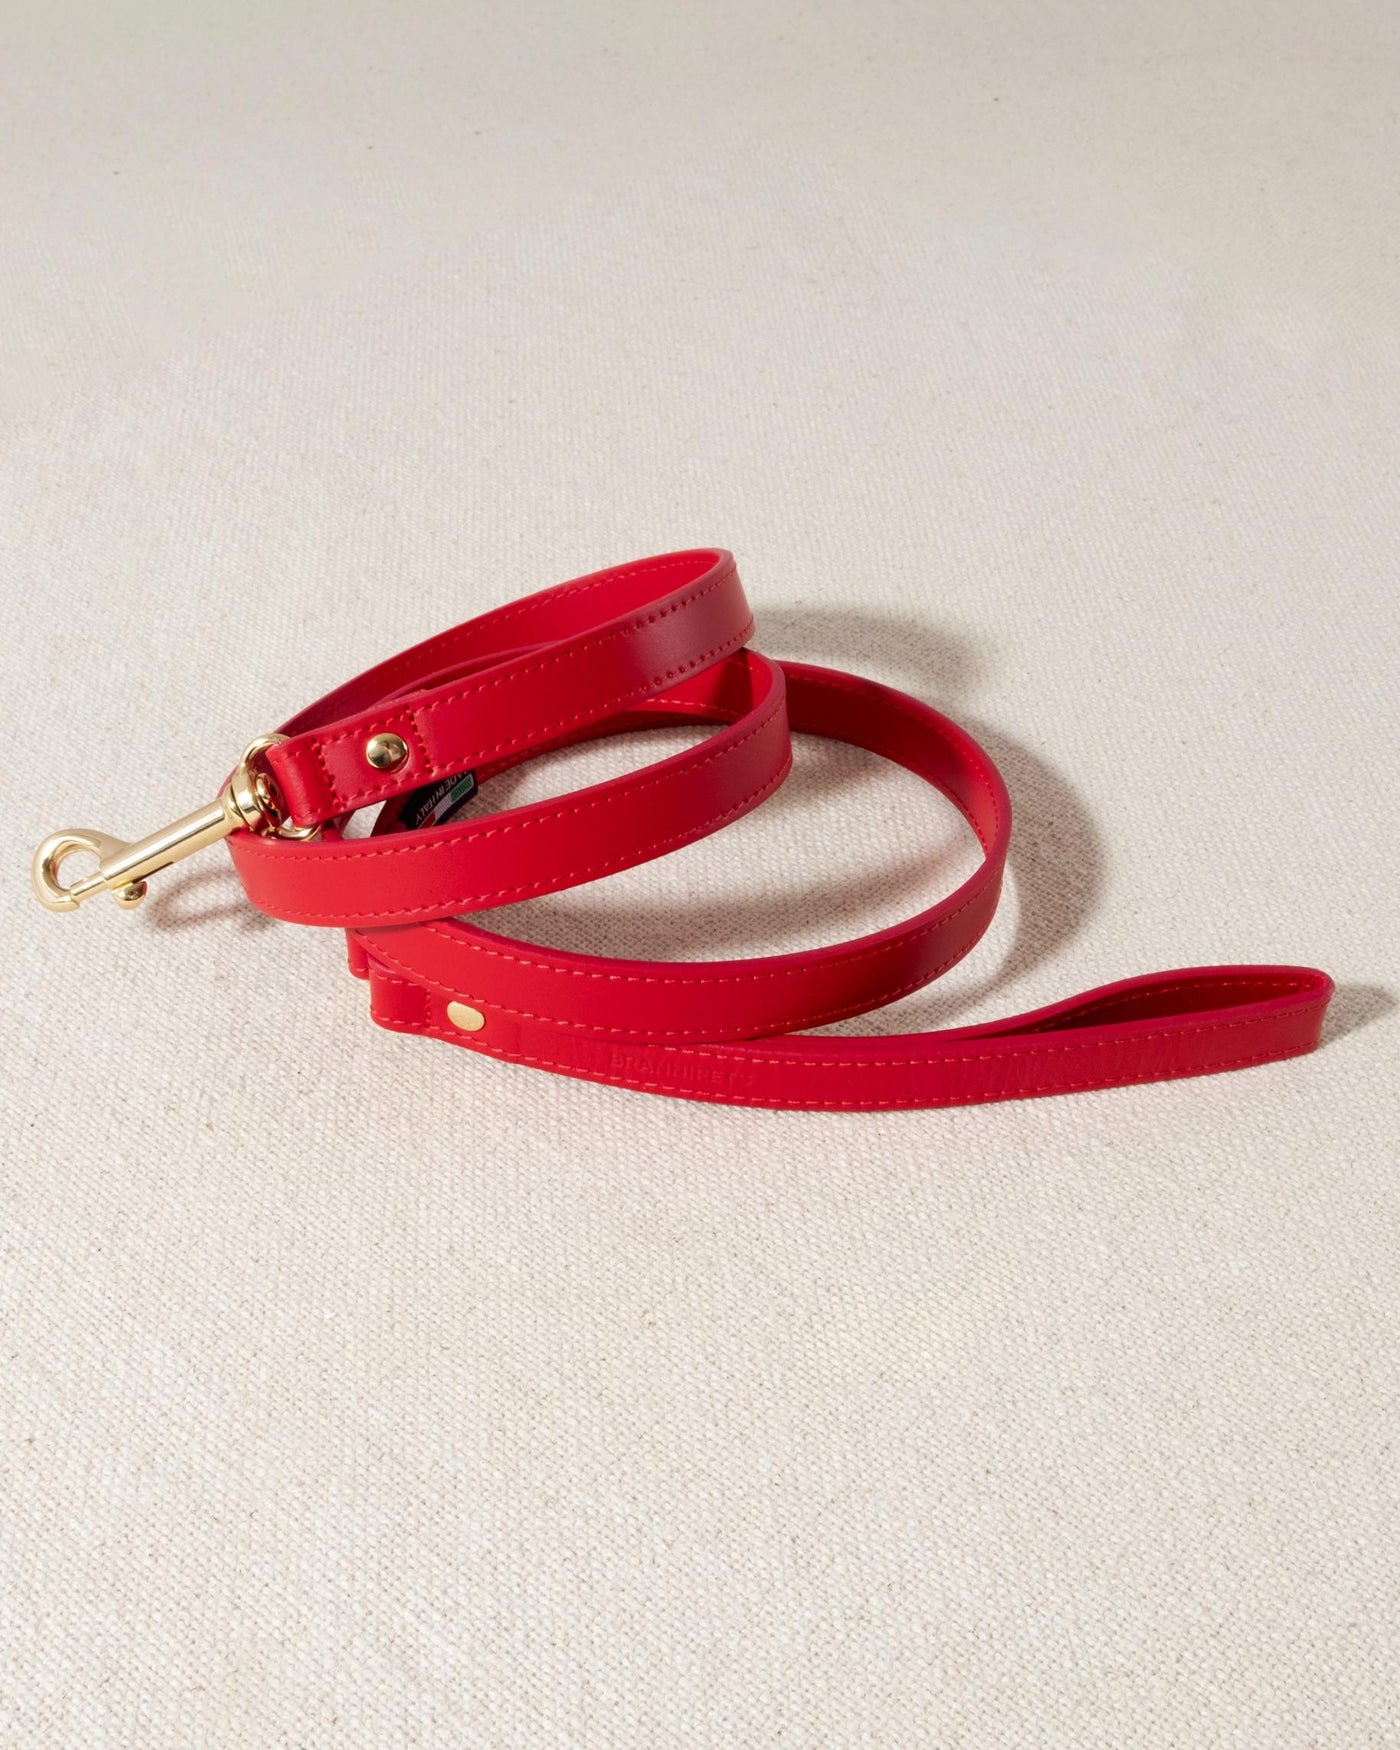 red leather dog leash with gold accents